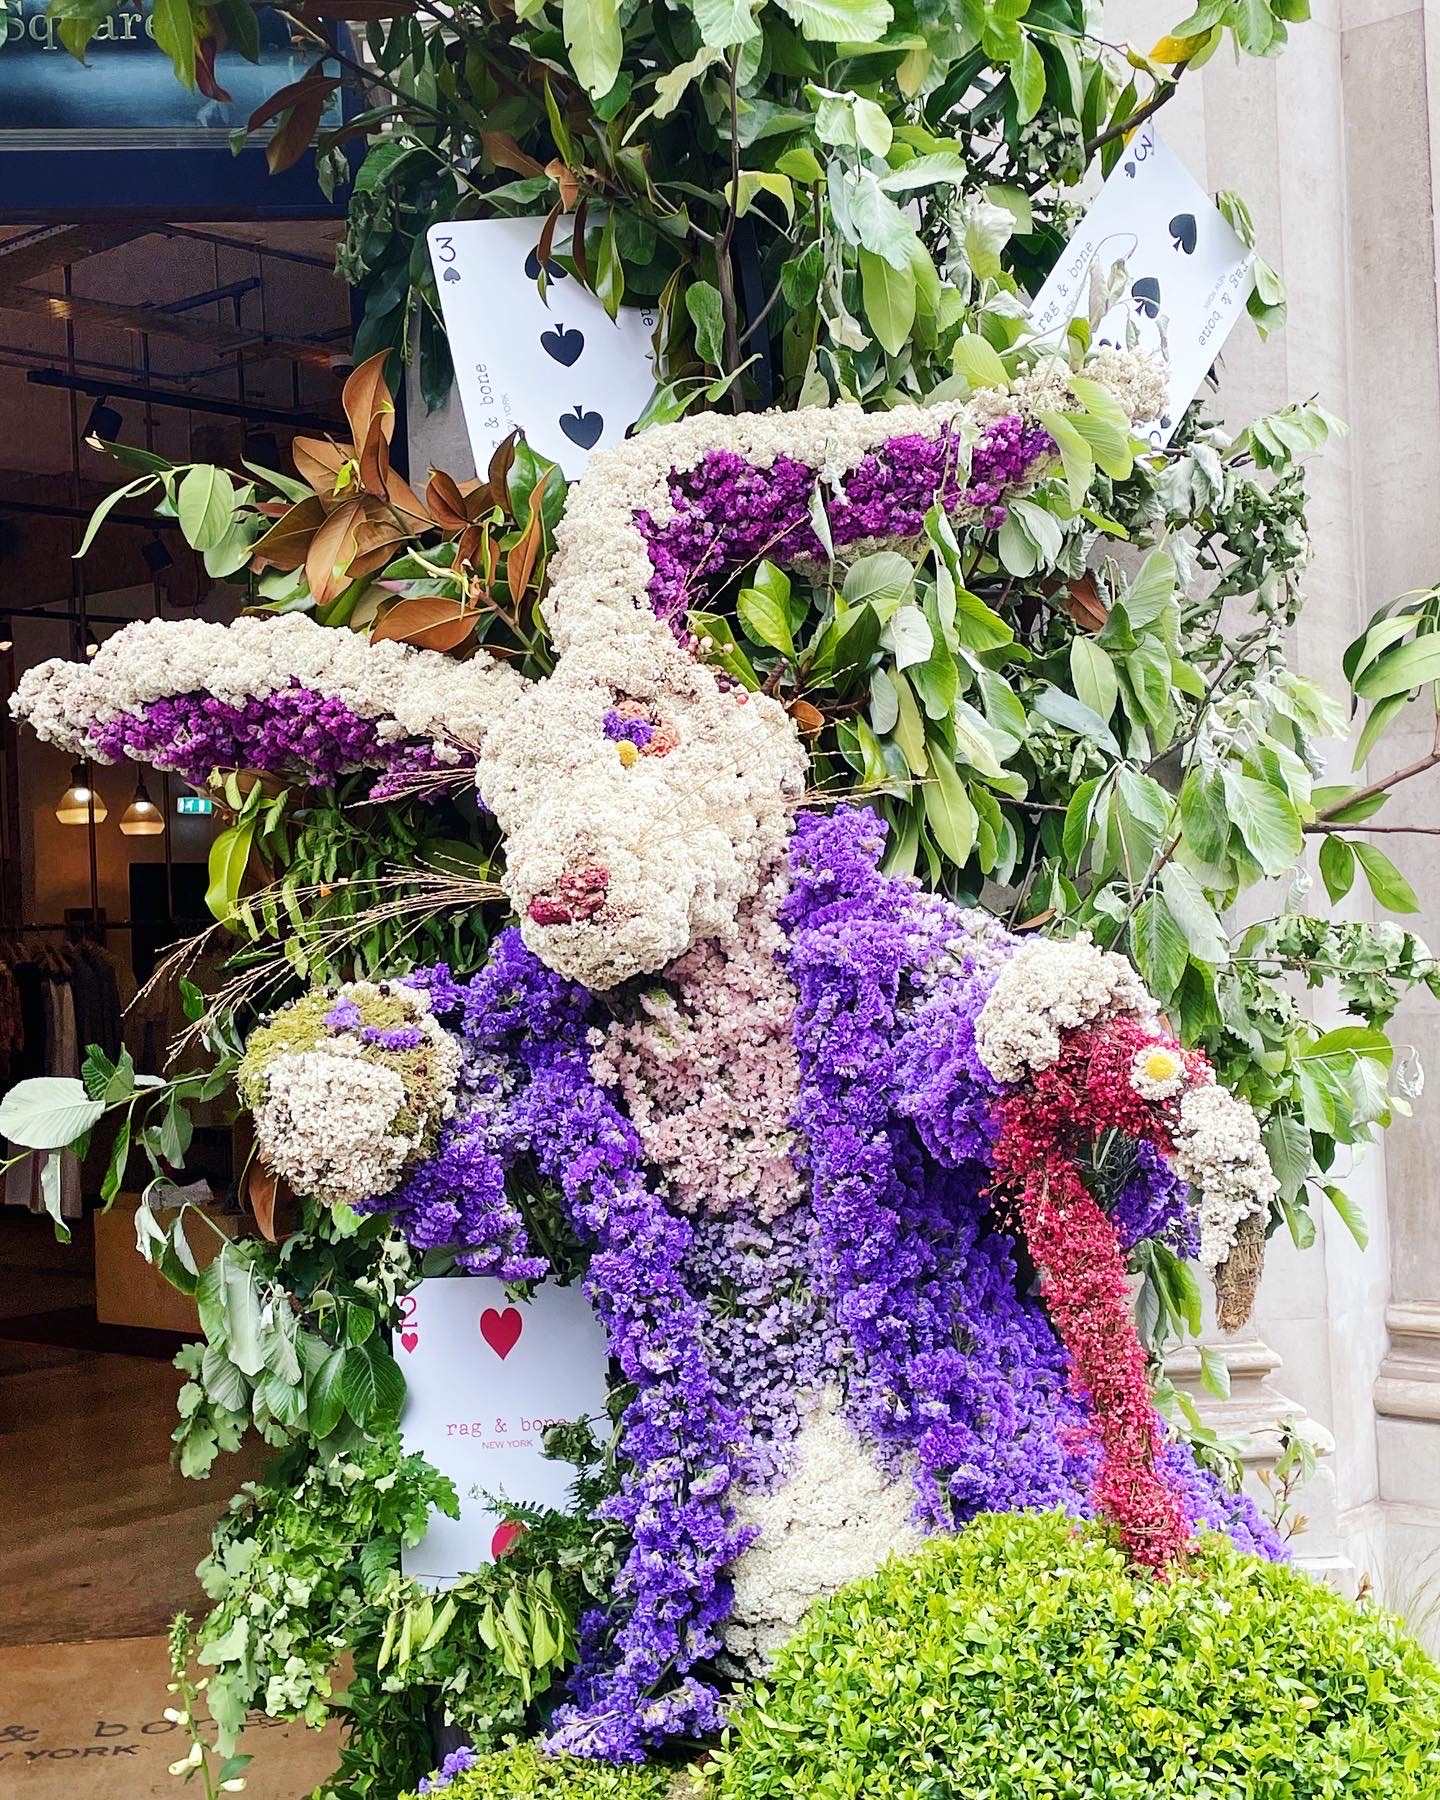 Rabbit-shaped floral display (in the spirit of Alice in Wonderland) with large playing cards in the background.